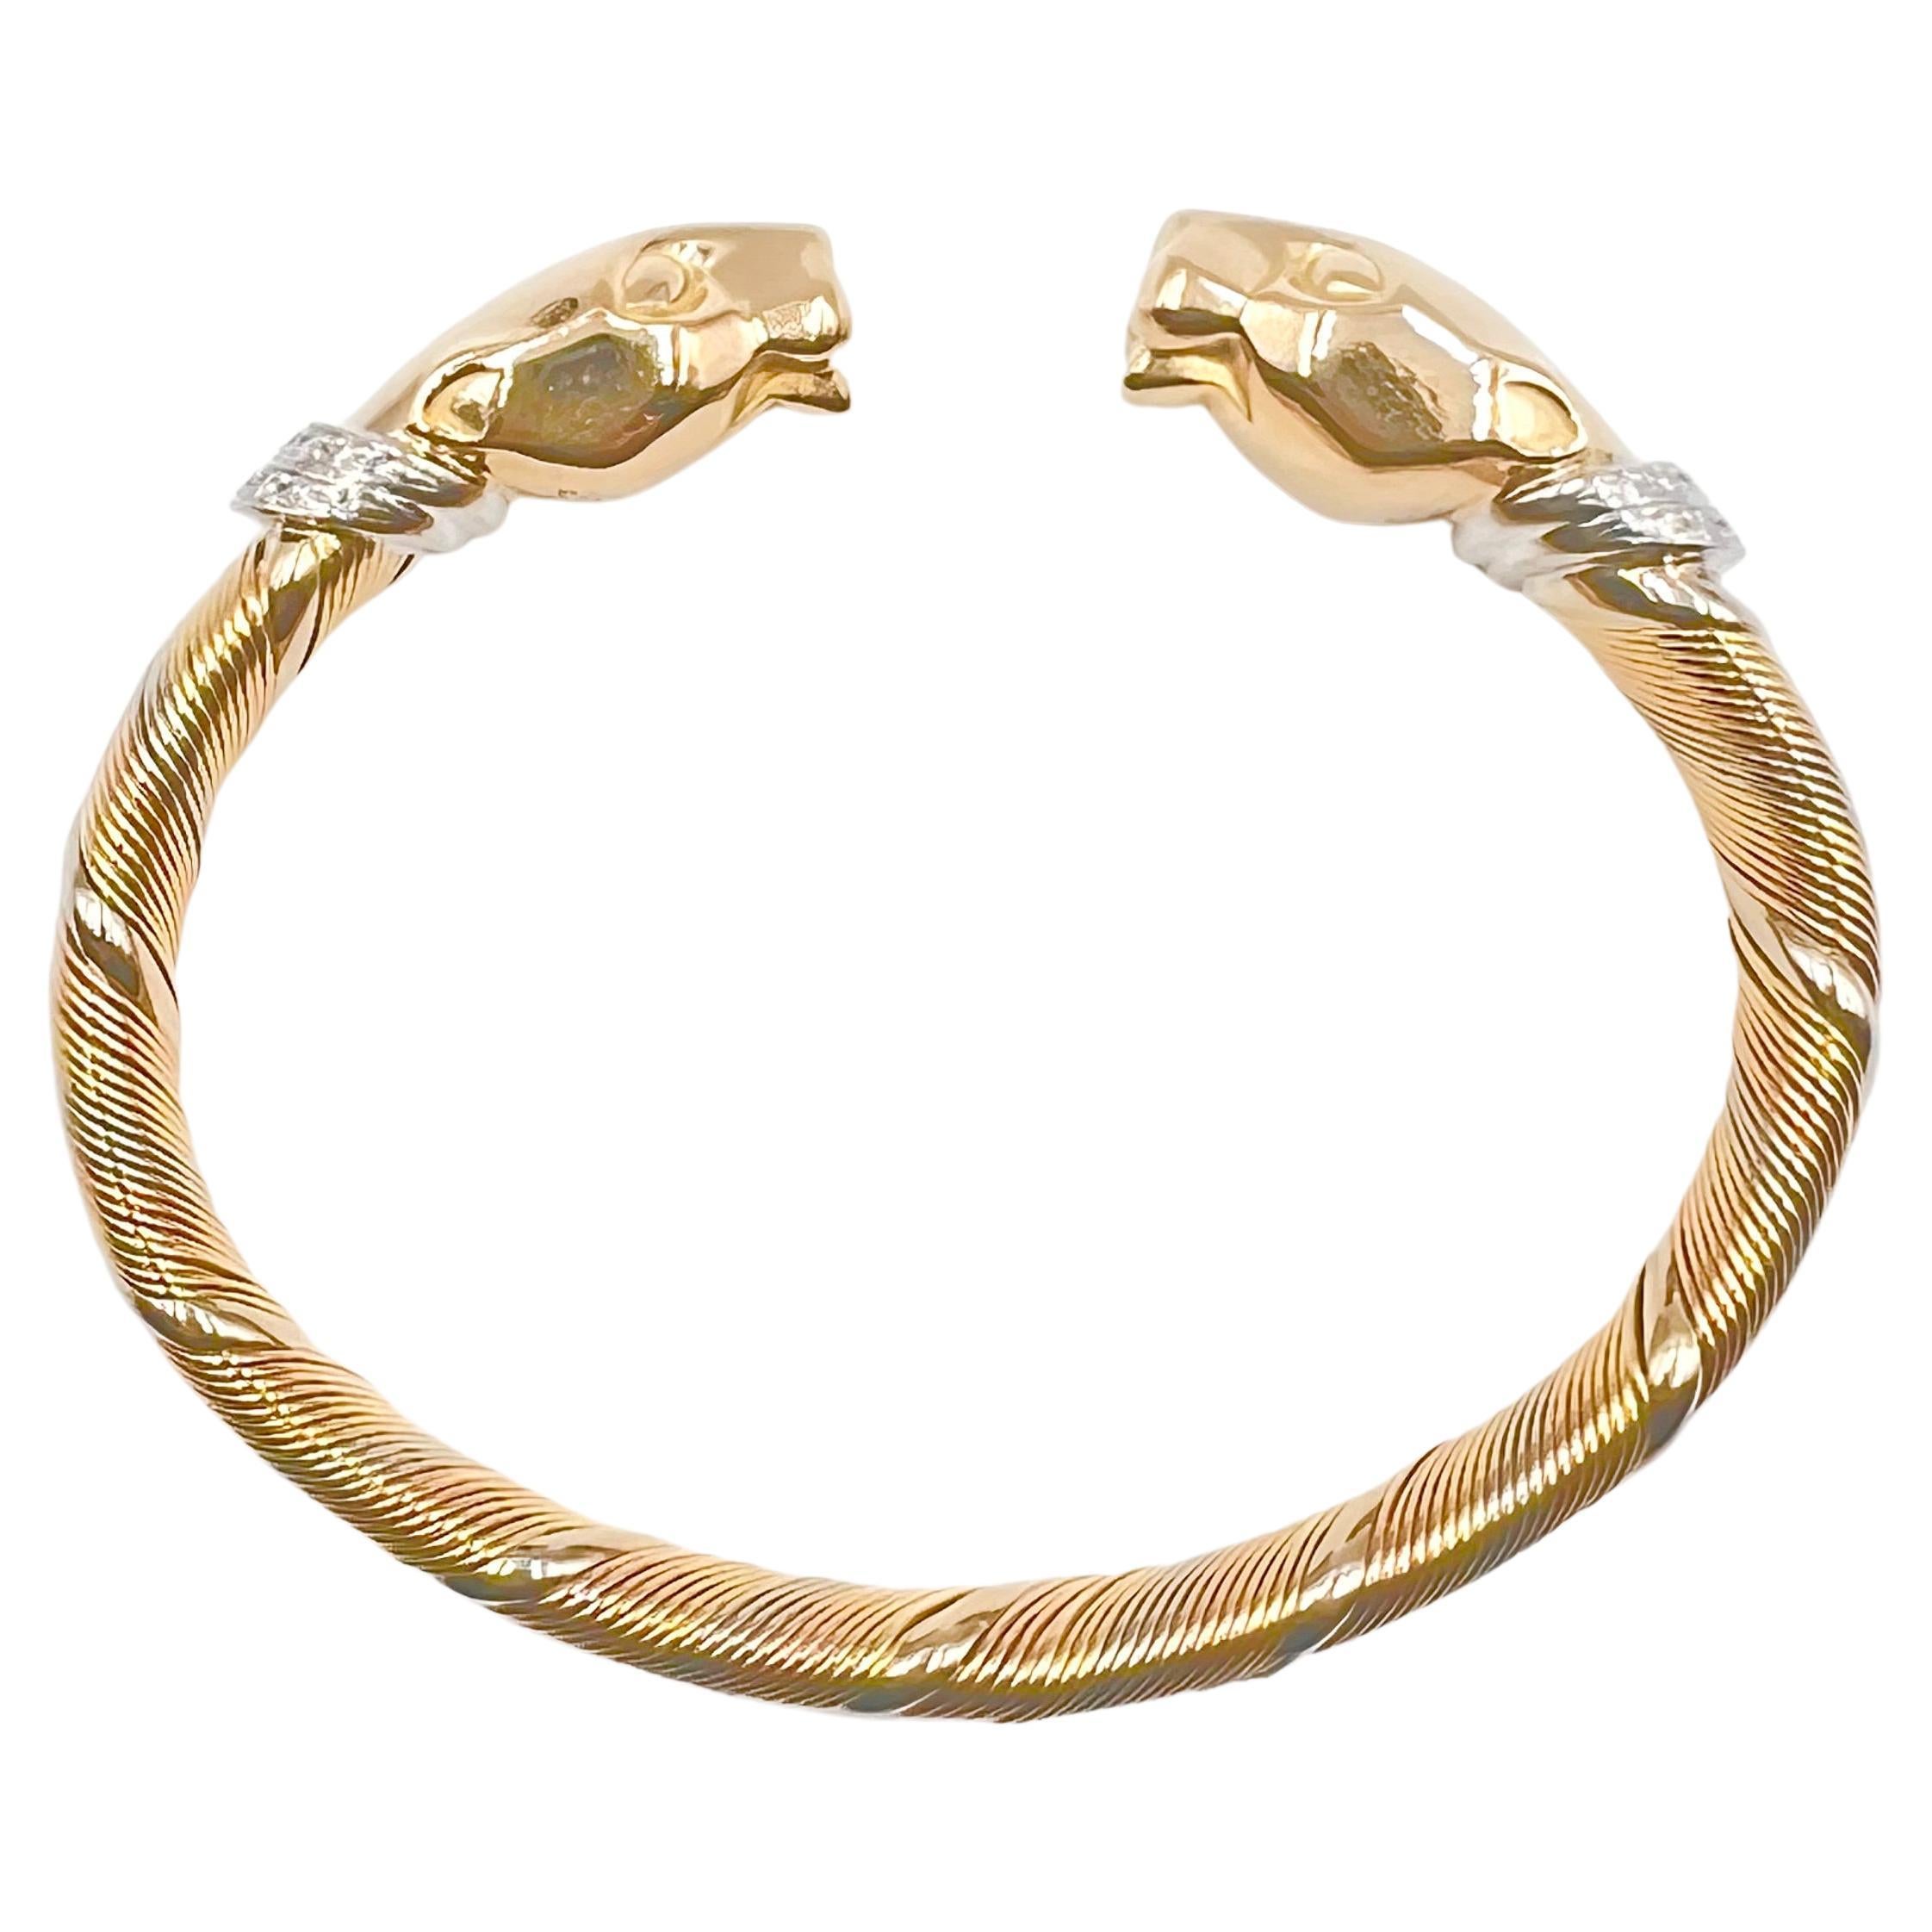 Cartier flexible cuff bracelet with polished, double panther heads in 18k yellow gold with 18k white gold collars accented by thirty-six round brilliant-cut diamonds weighing approximately 0.50 total carats. The main section of the bracelet is